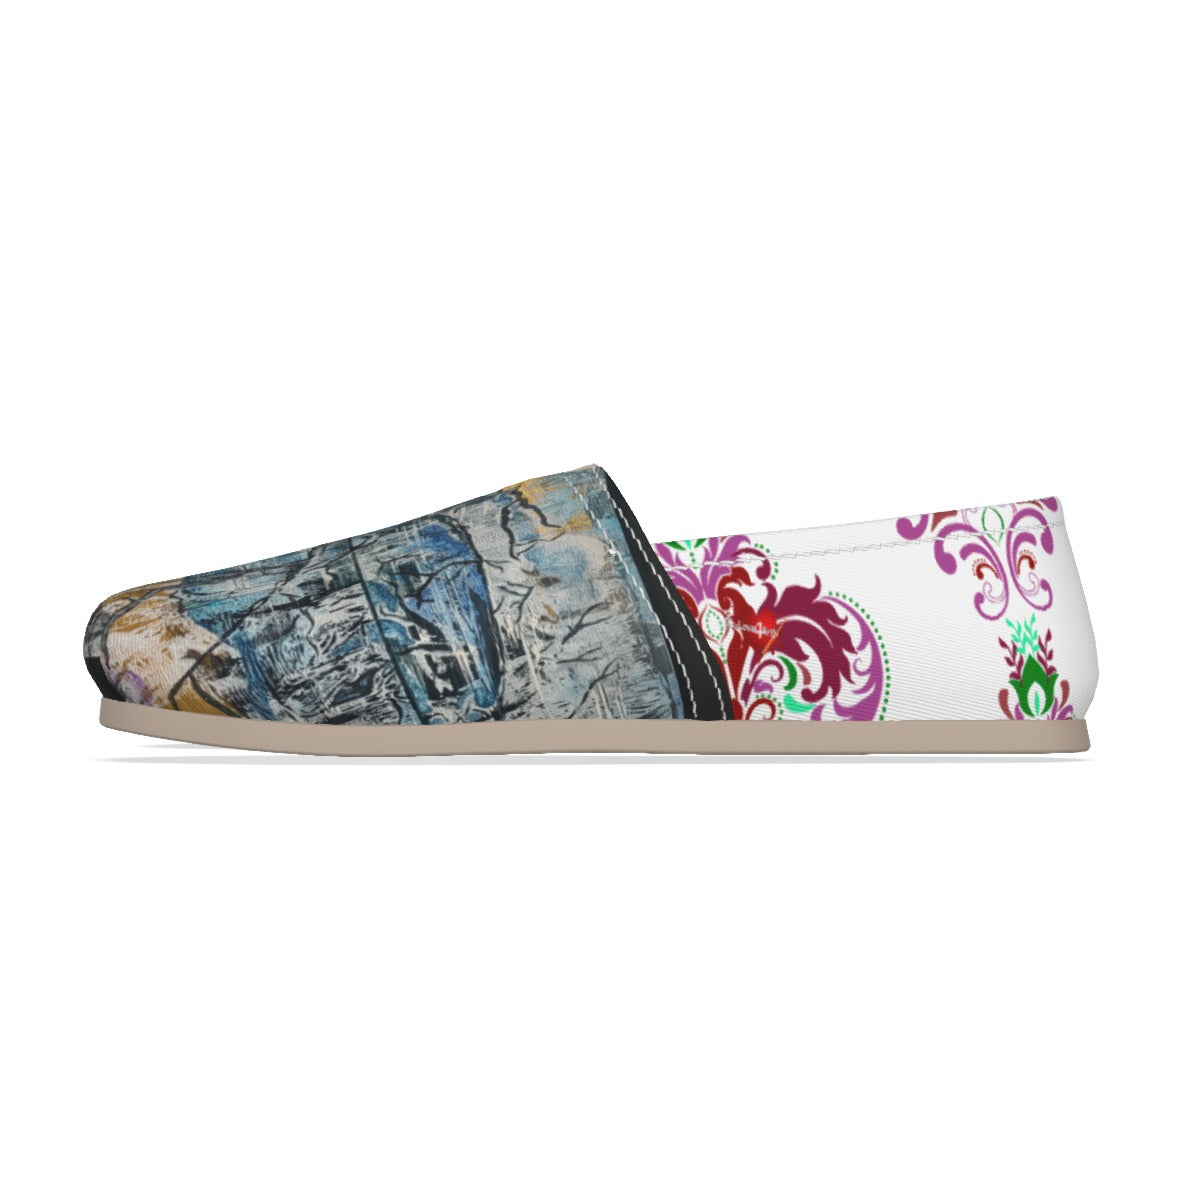 Forest - All-Over Print Women's Canvas Fisherman Shoes